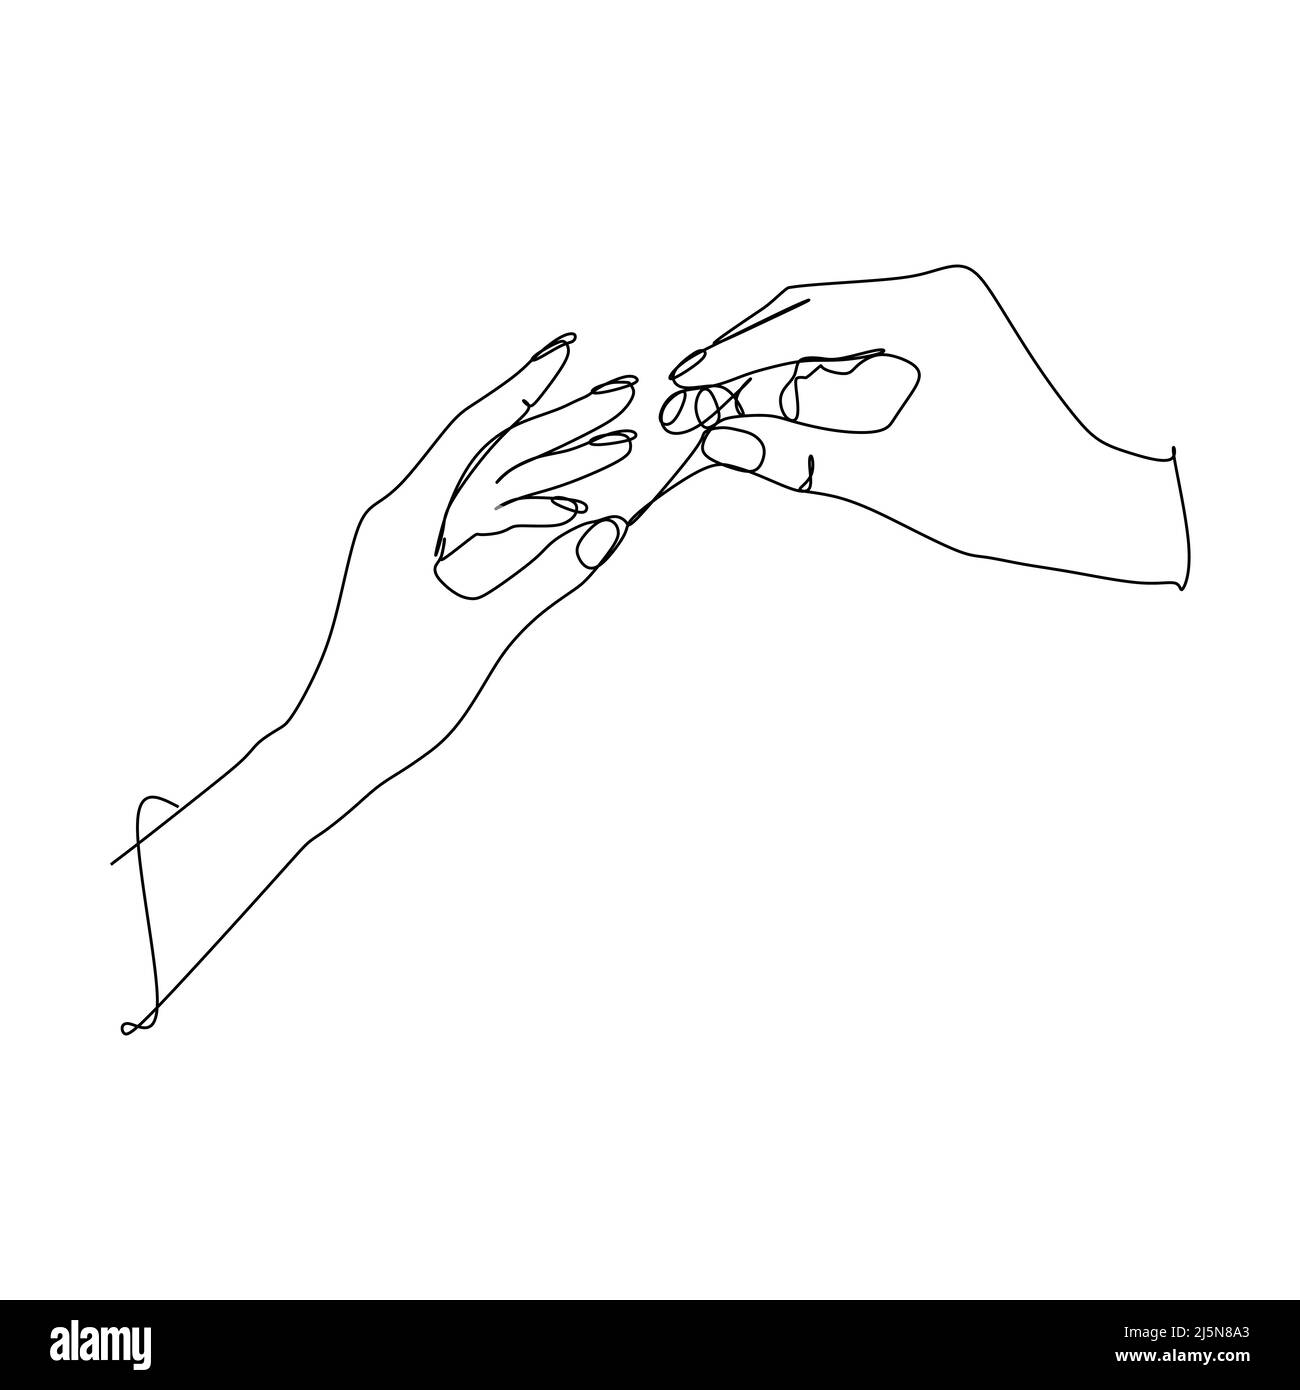 Continuous line draw design vector illustration. Sign and symbol of hand gestures. Single continuous drawing line. Hand drawn style art doodle isolate Stock Vector